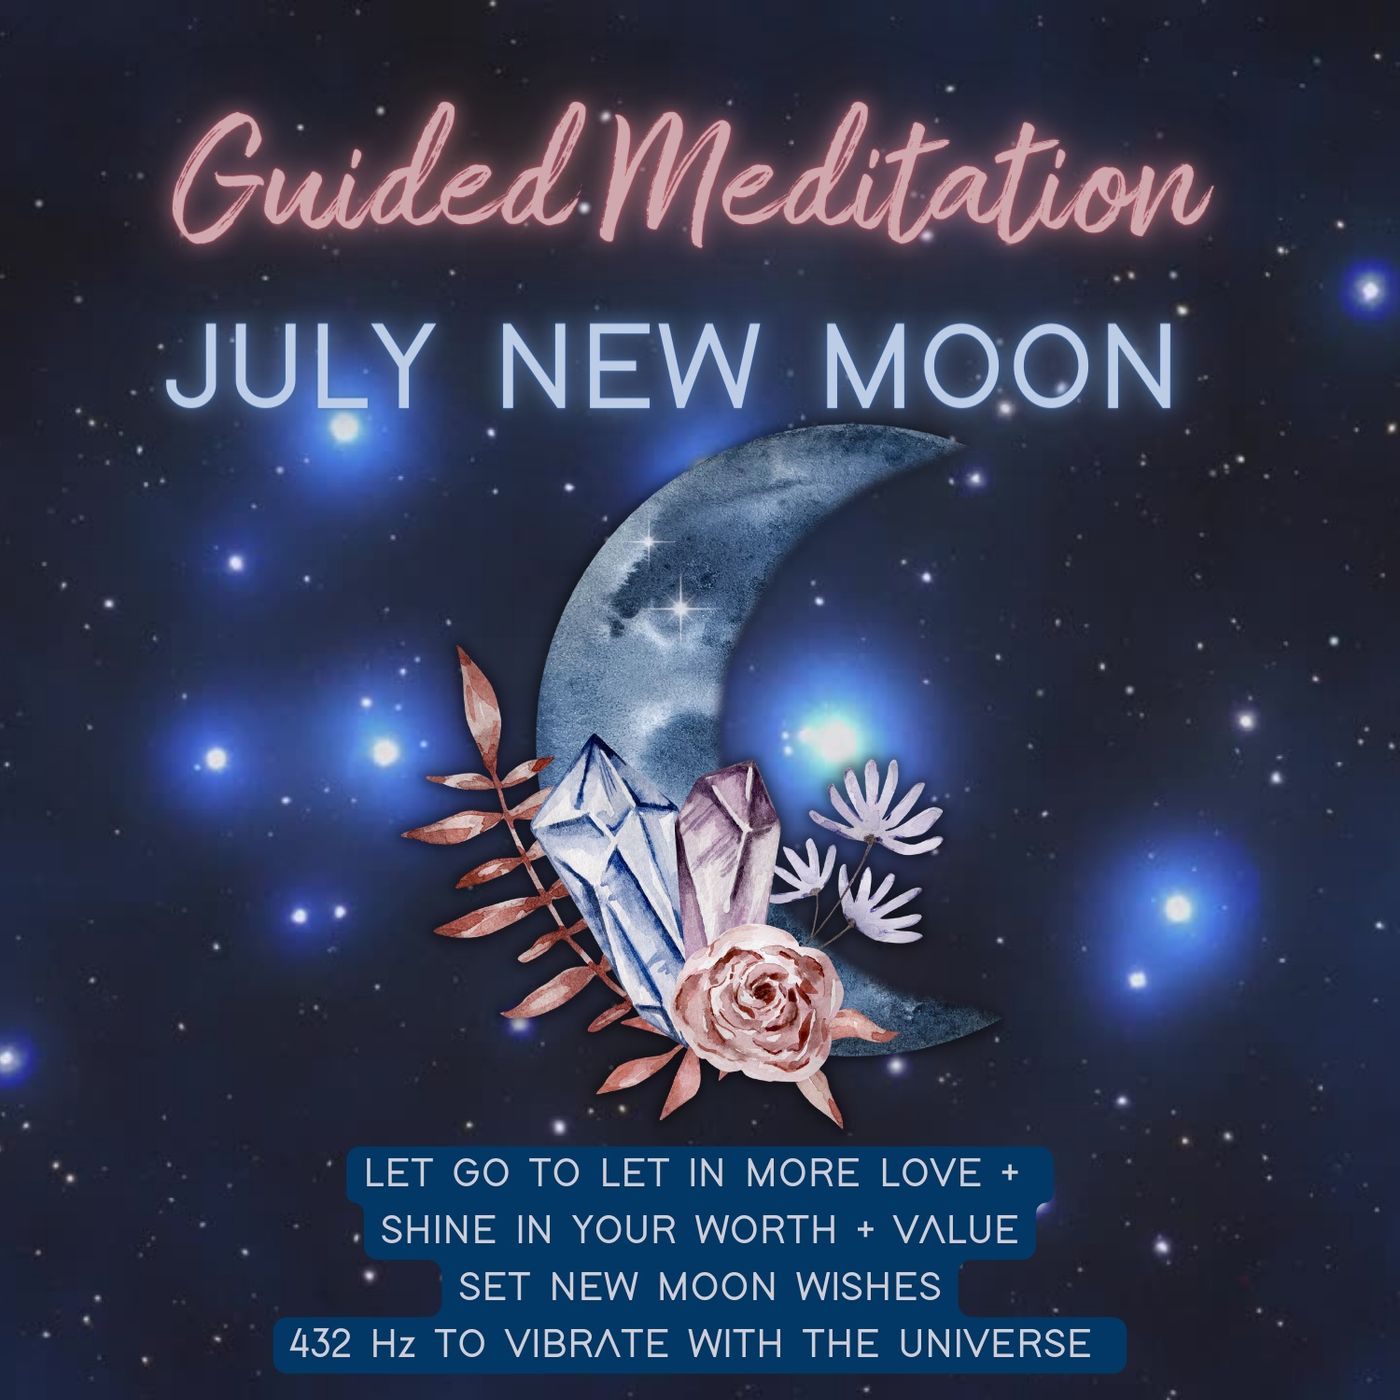 July New Moon Guided Meditation | 432 Hz Frequency | Let Go + Let in Love | Manifest